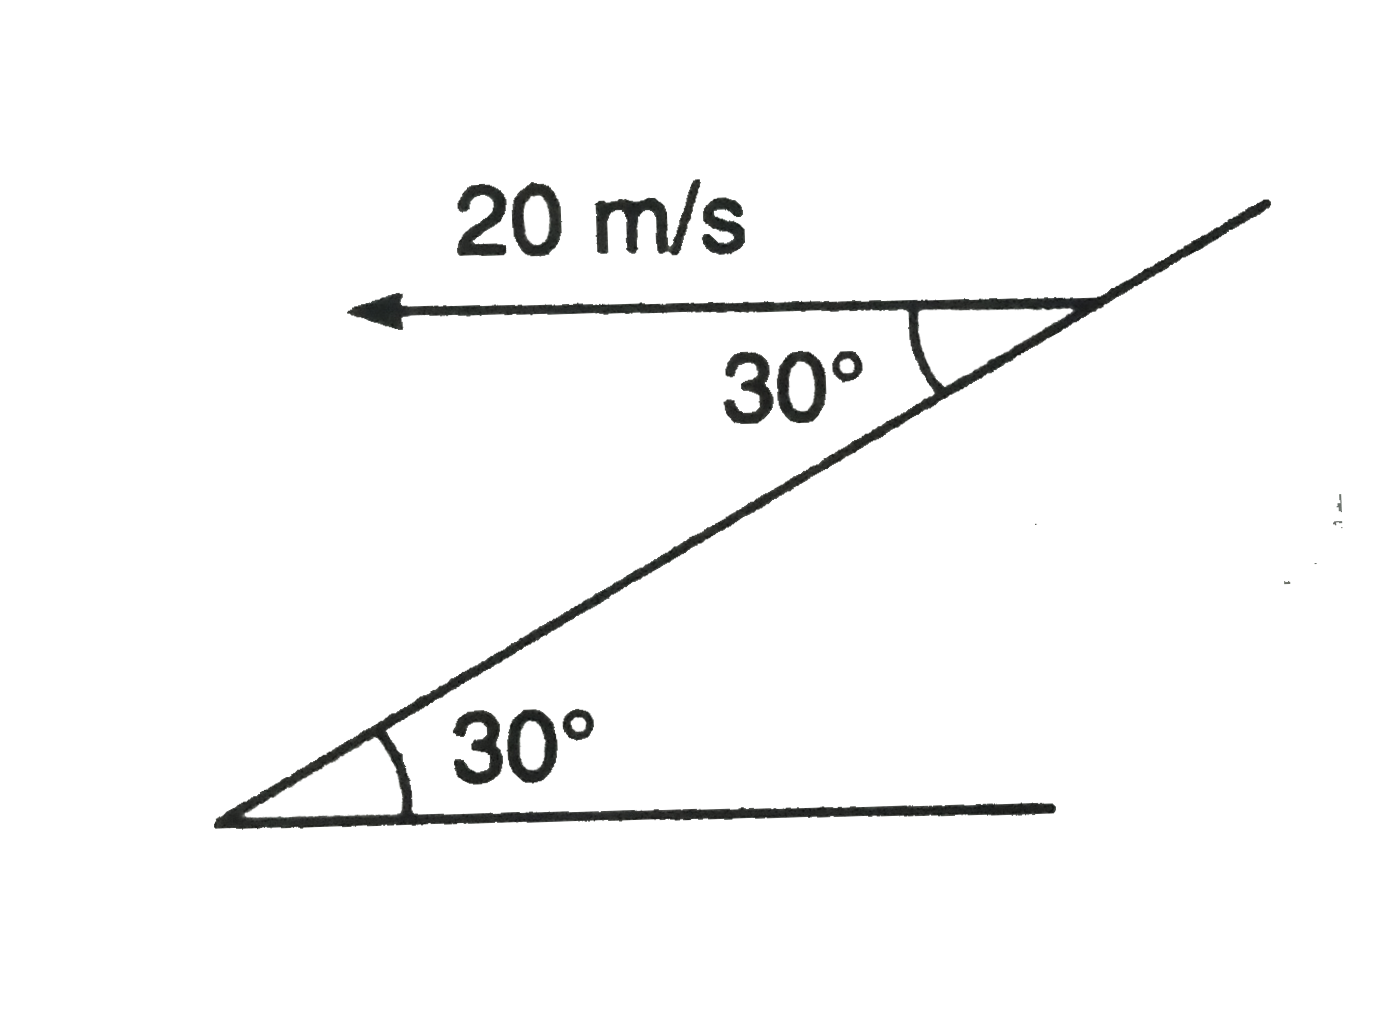 Find time of flight and range of the projectile along the inclined plane as shown in figure. (g = 10 m//s^2)